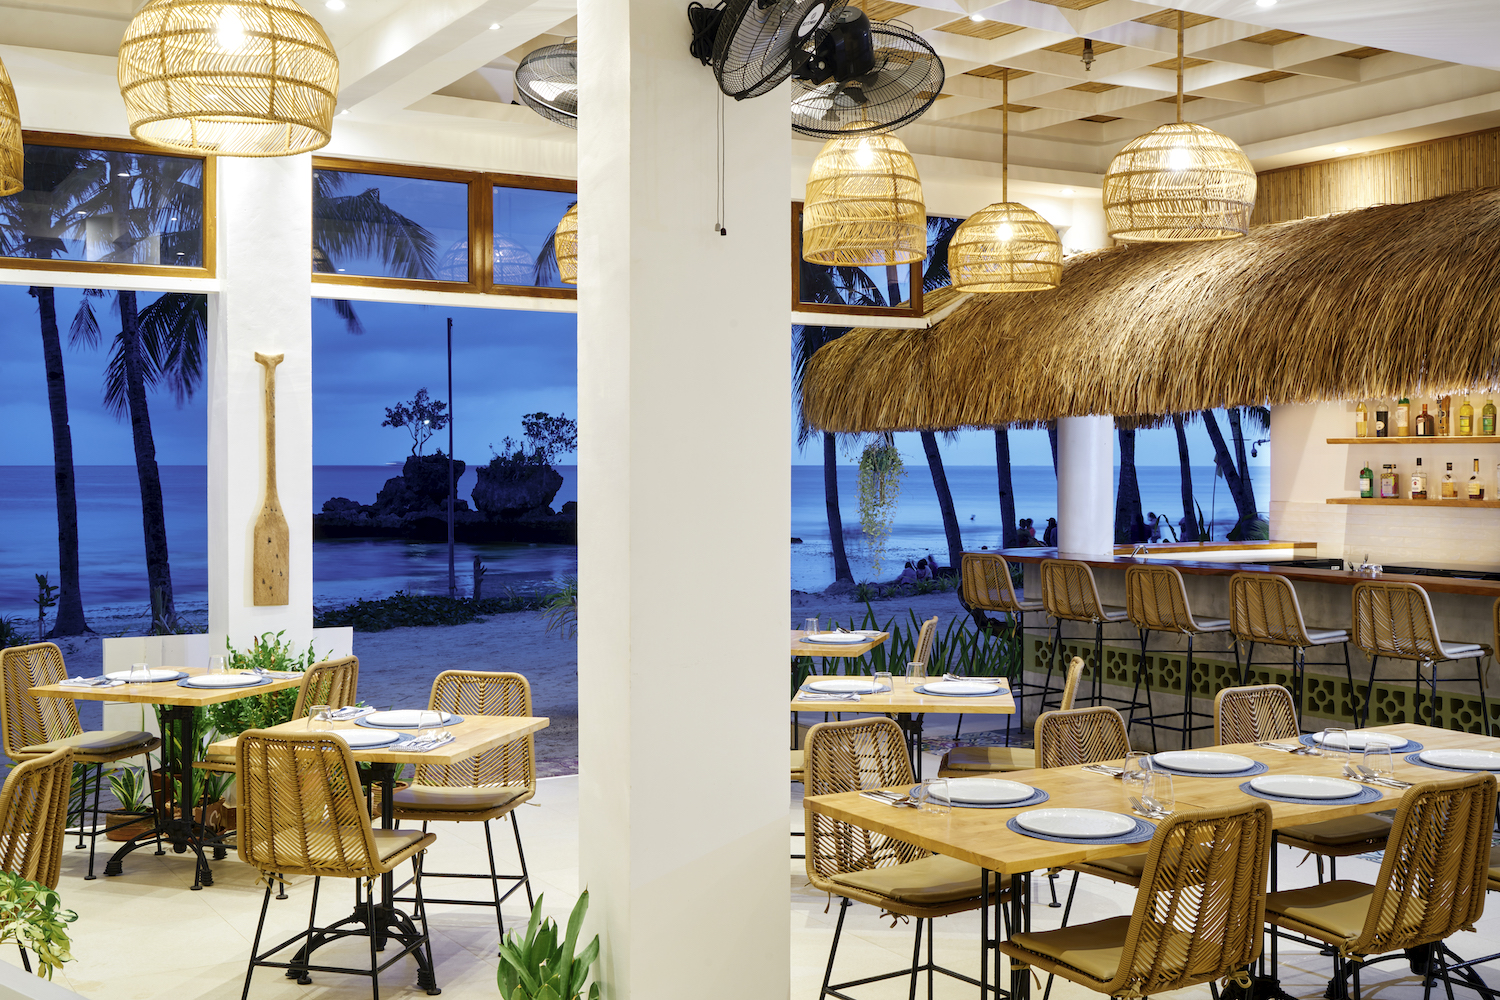 The beachfront location is a key asset in bringing customers closer to delicious sea views and seafood